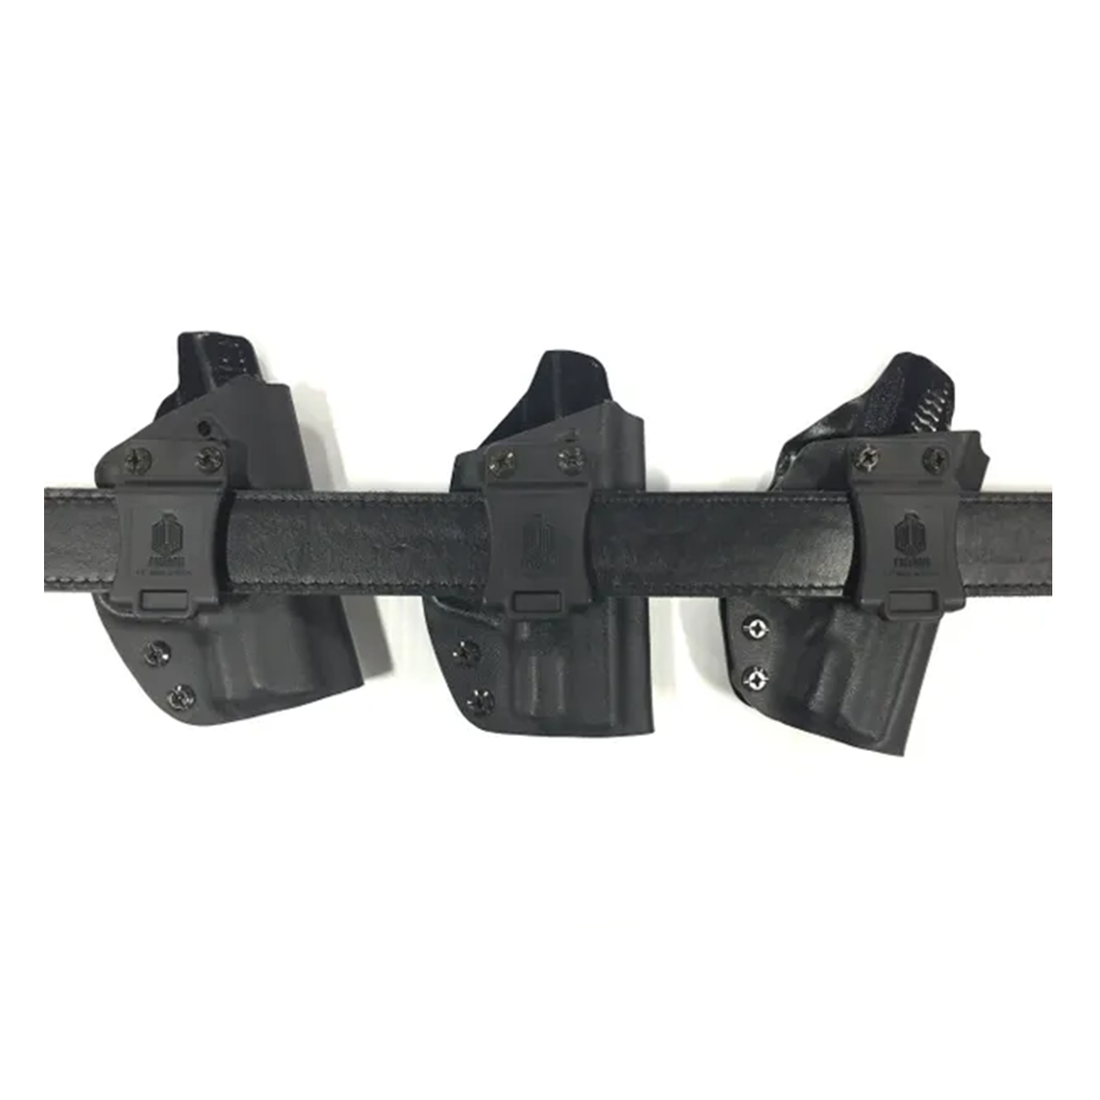 SCCY IWB Holsters